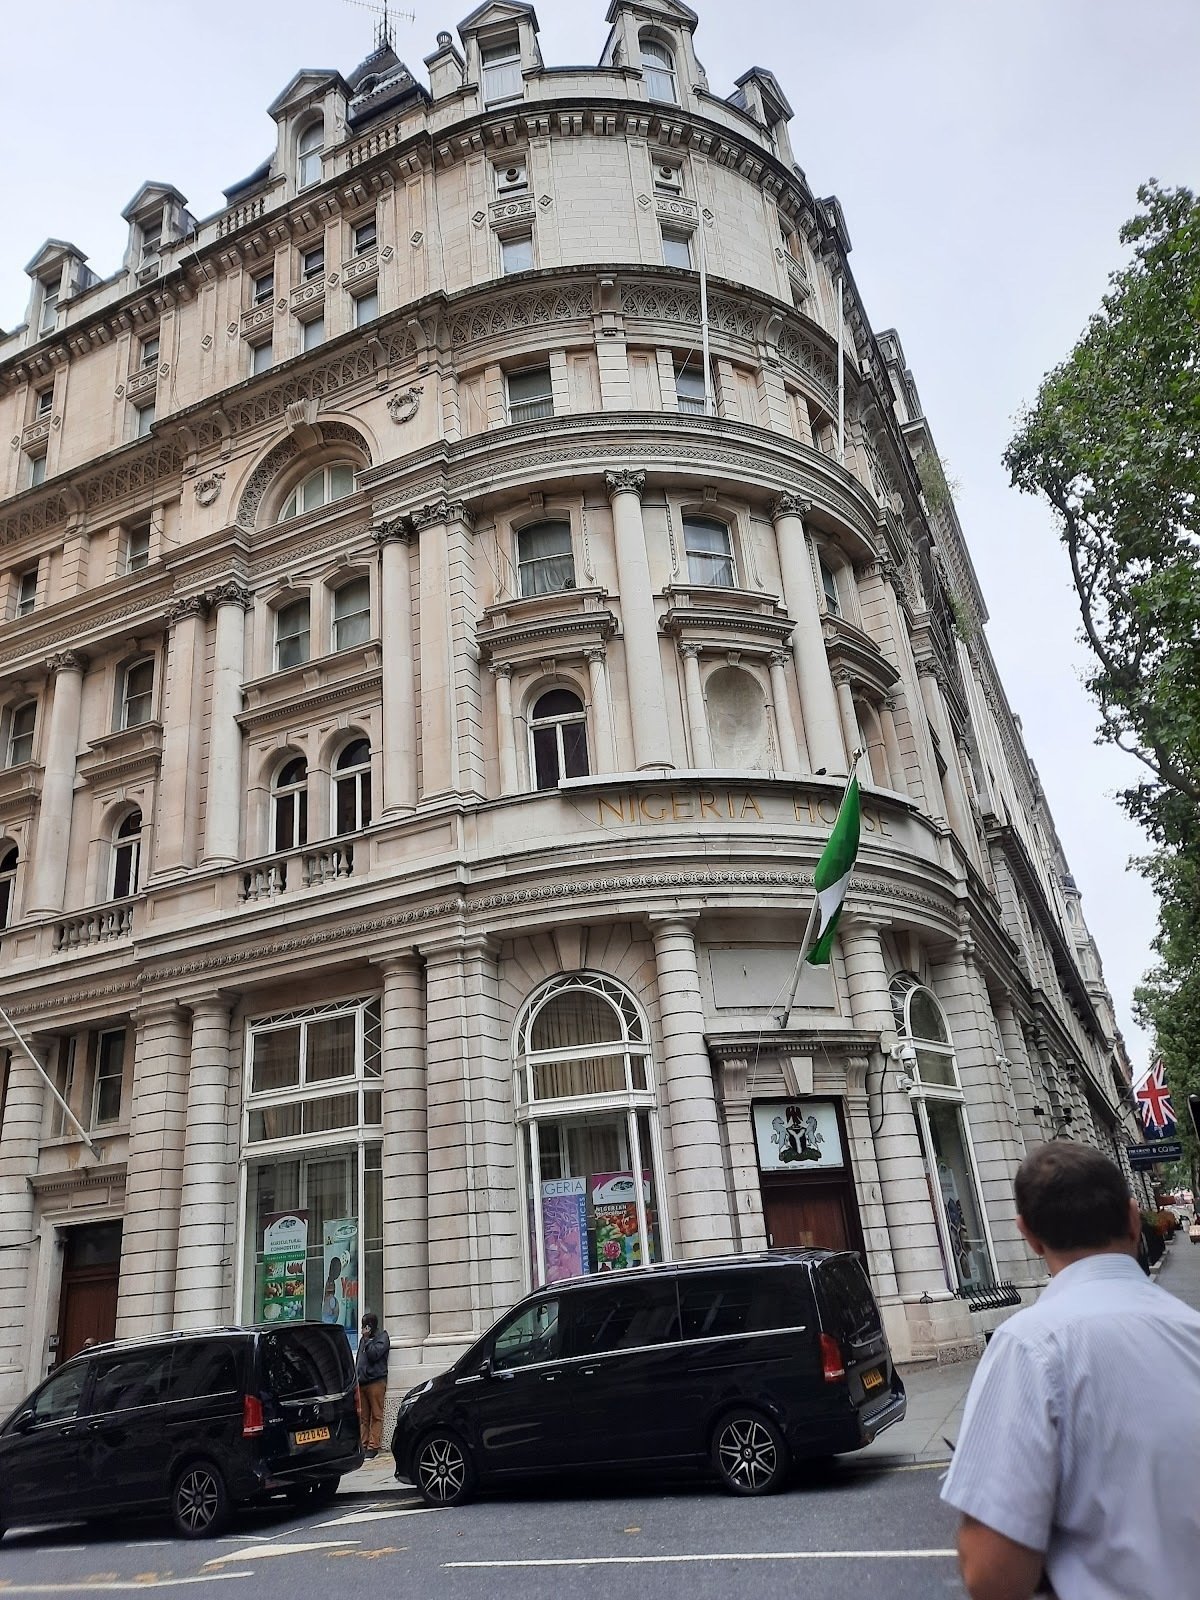 <span class="translation_missing" title="translation missing: en.meta.location_title, location_name: Nigeria High Commission, city: London">Location Title</span>